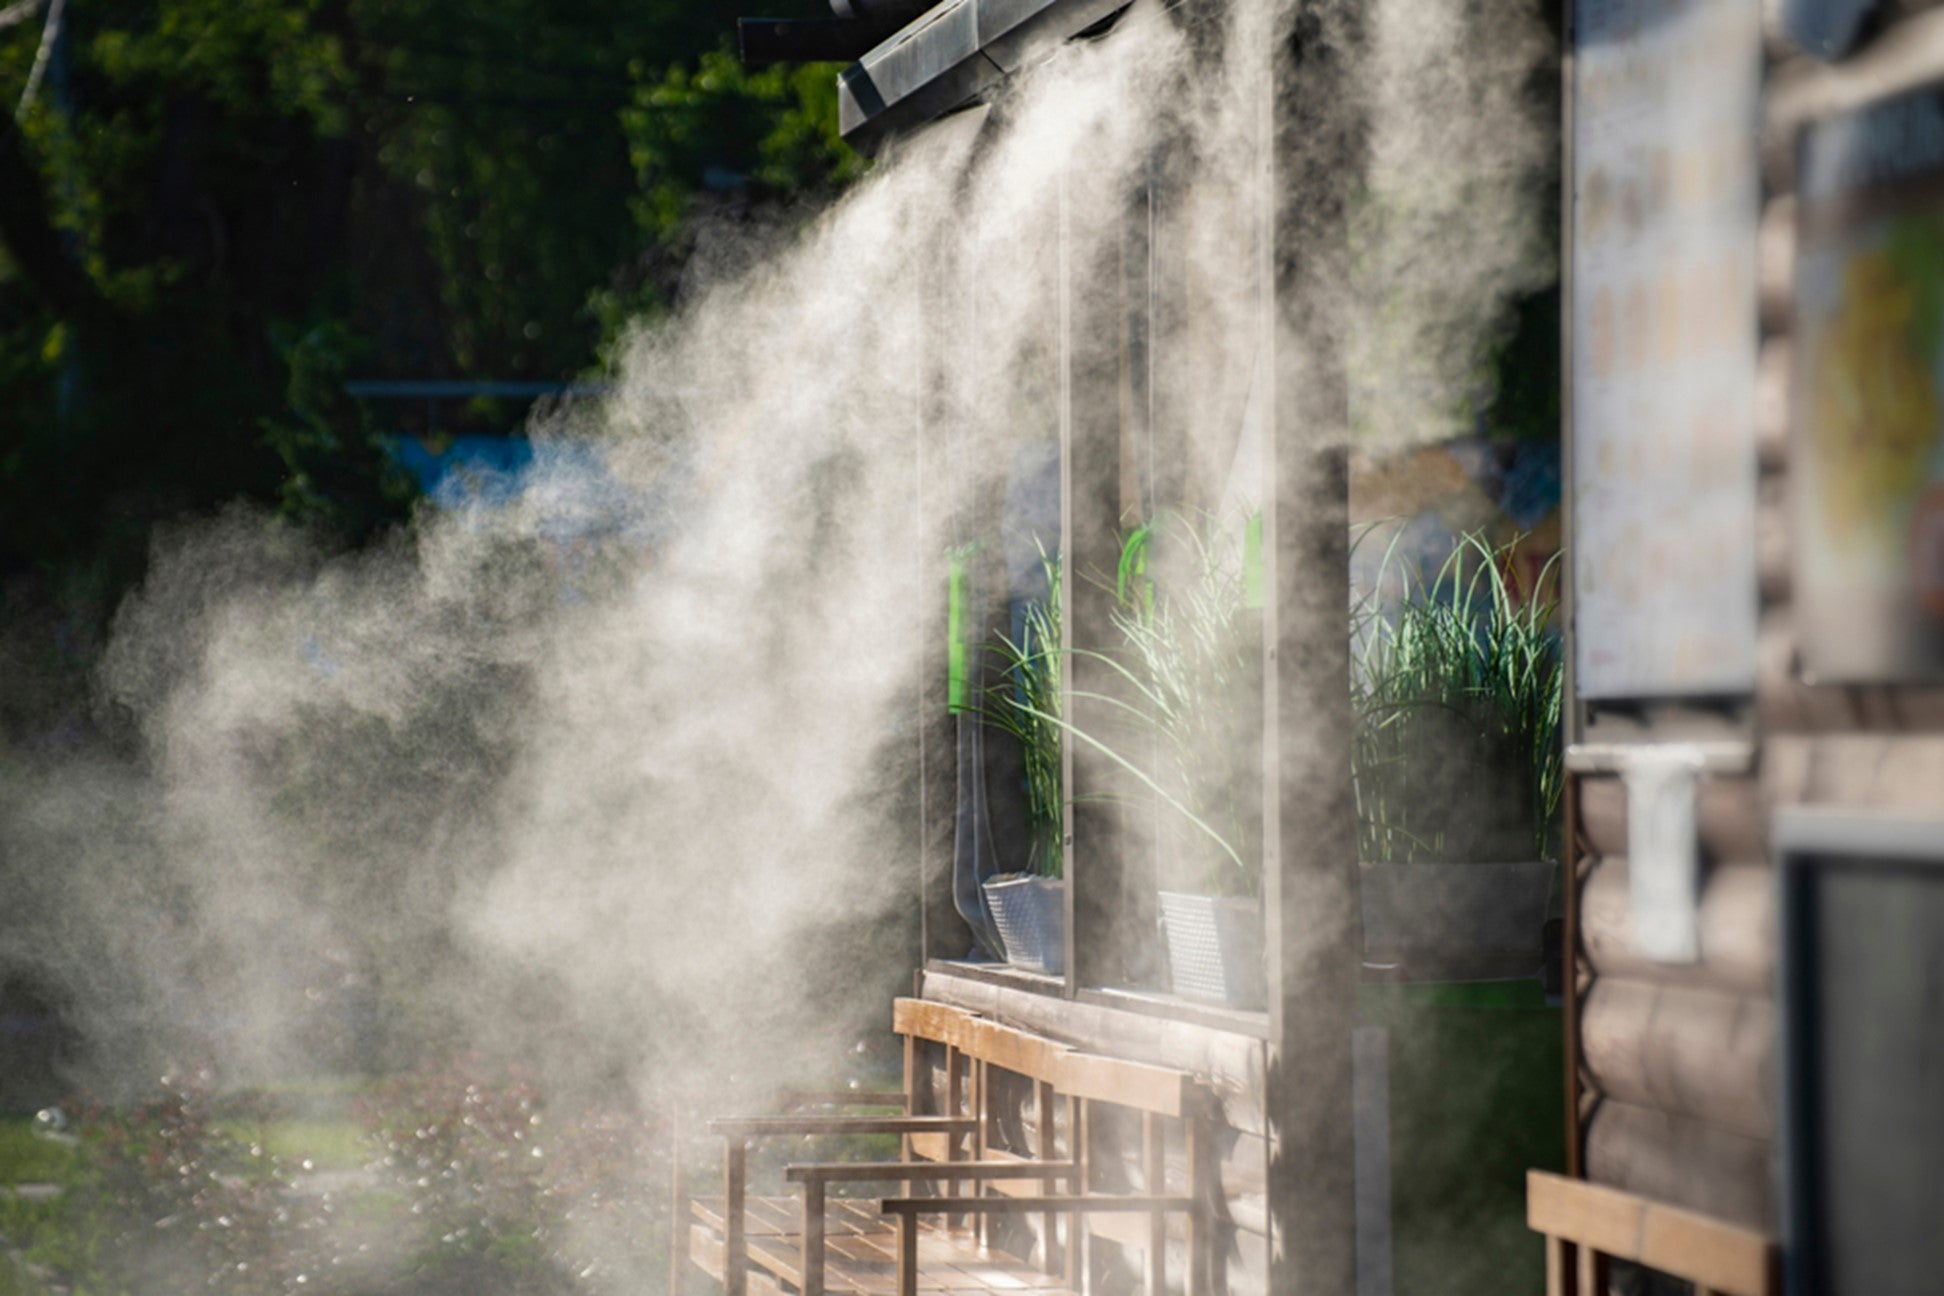 Outdoor misting system